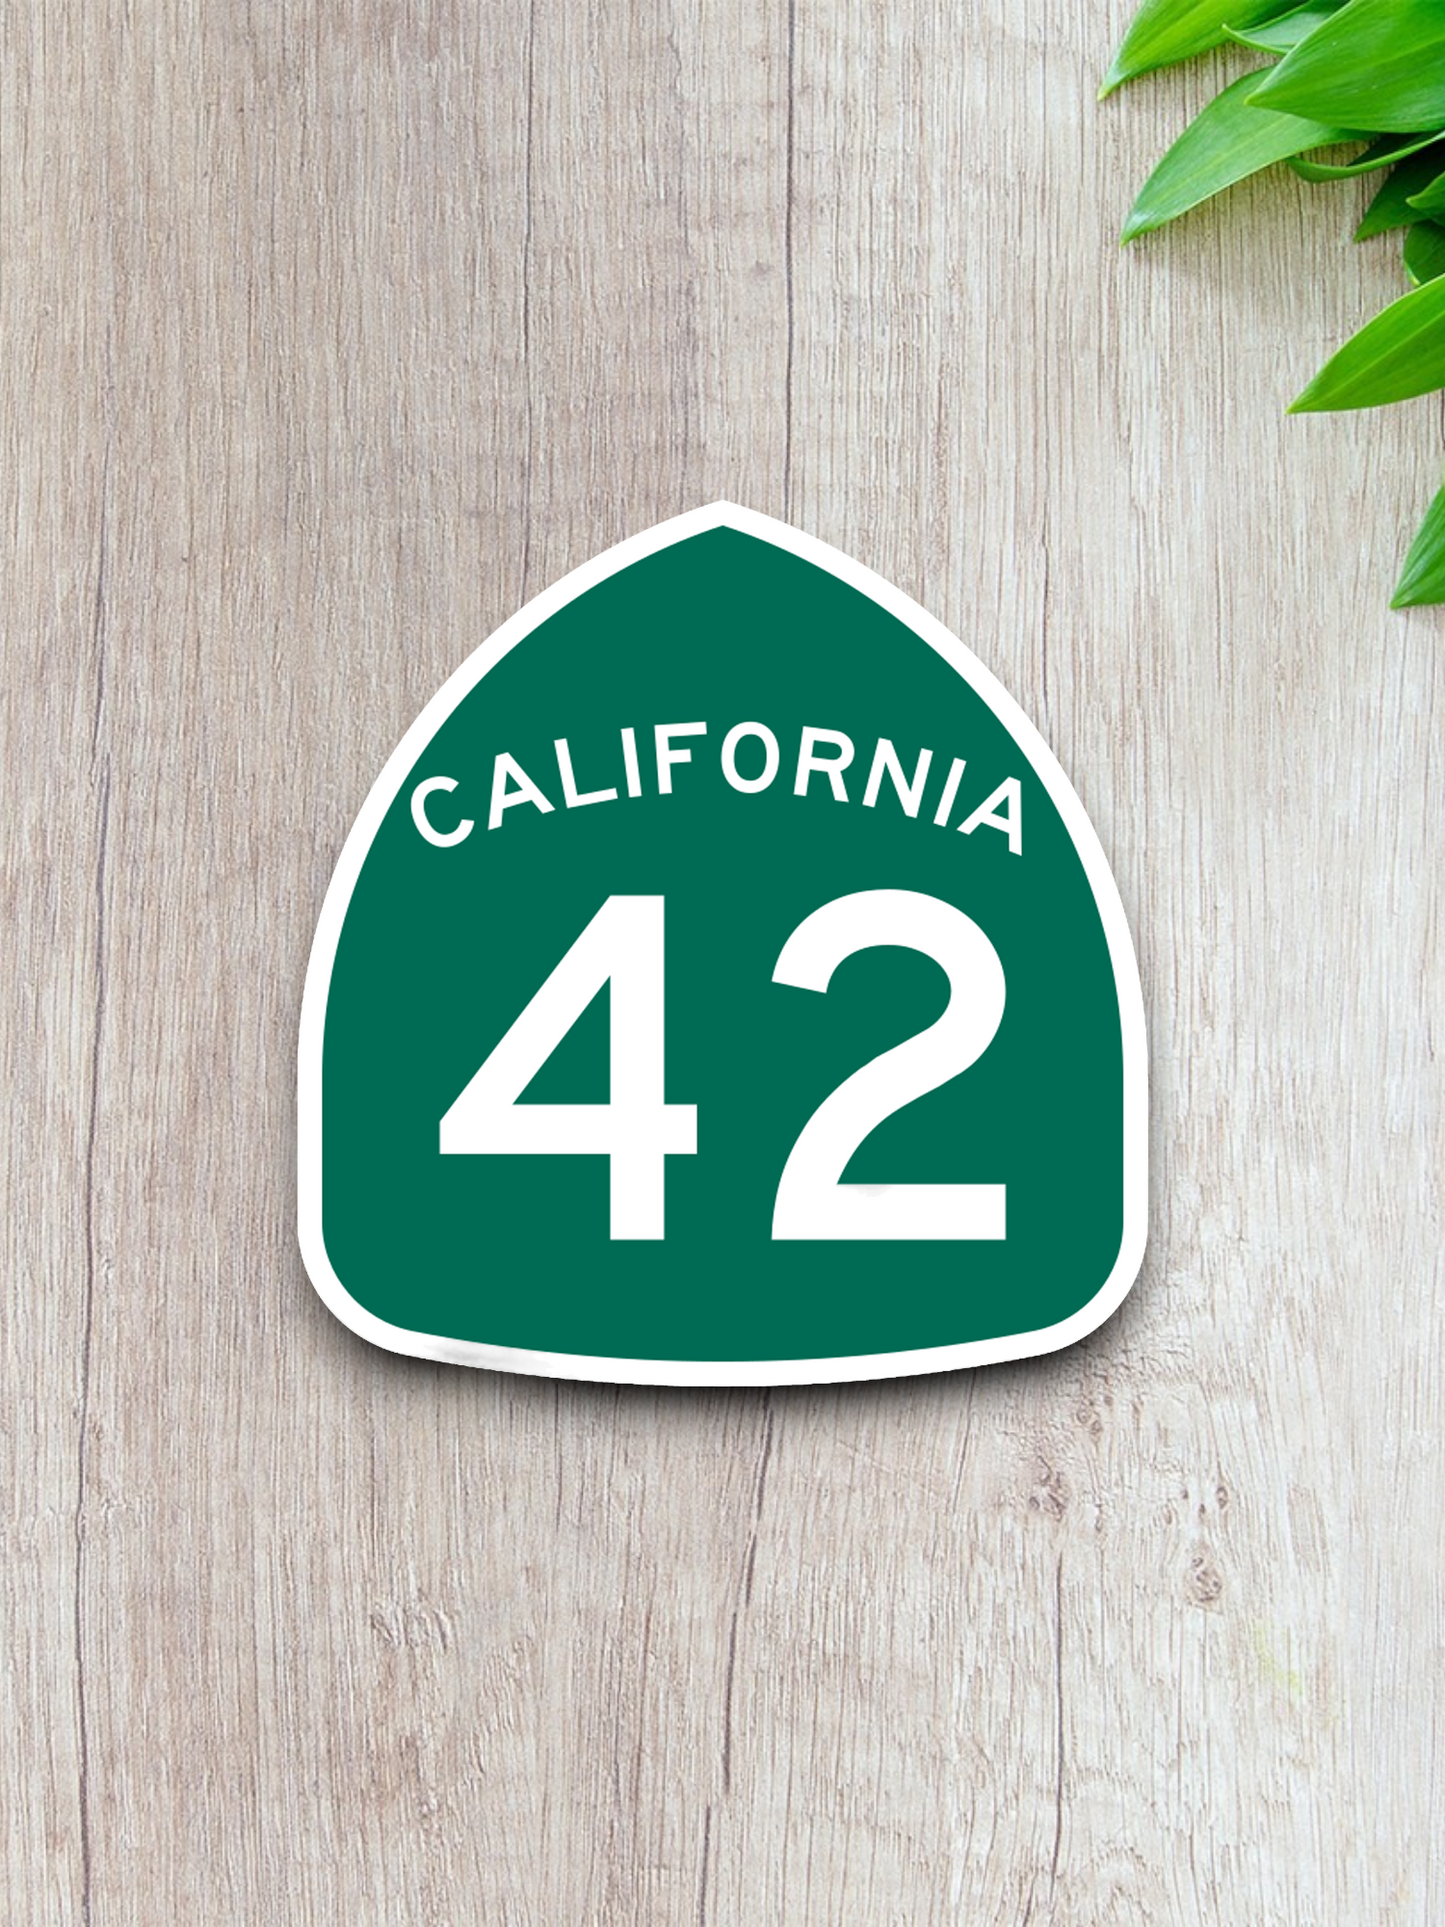 California State Route 42 Road Sign Sticker